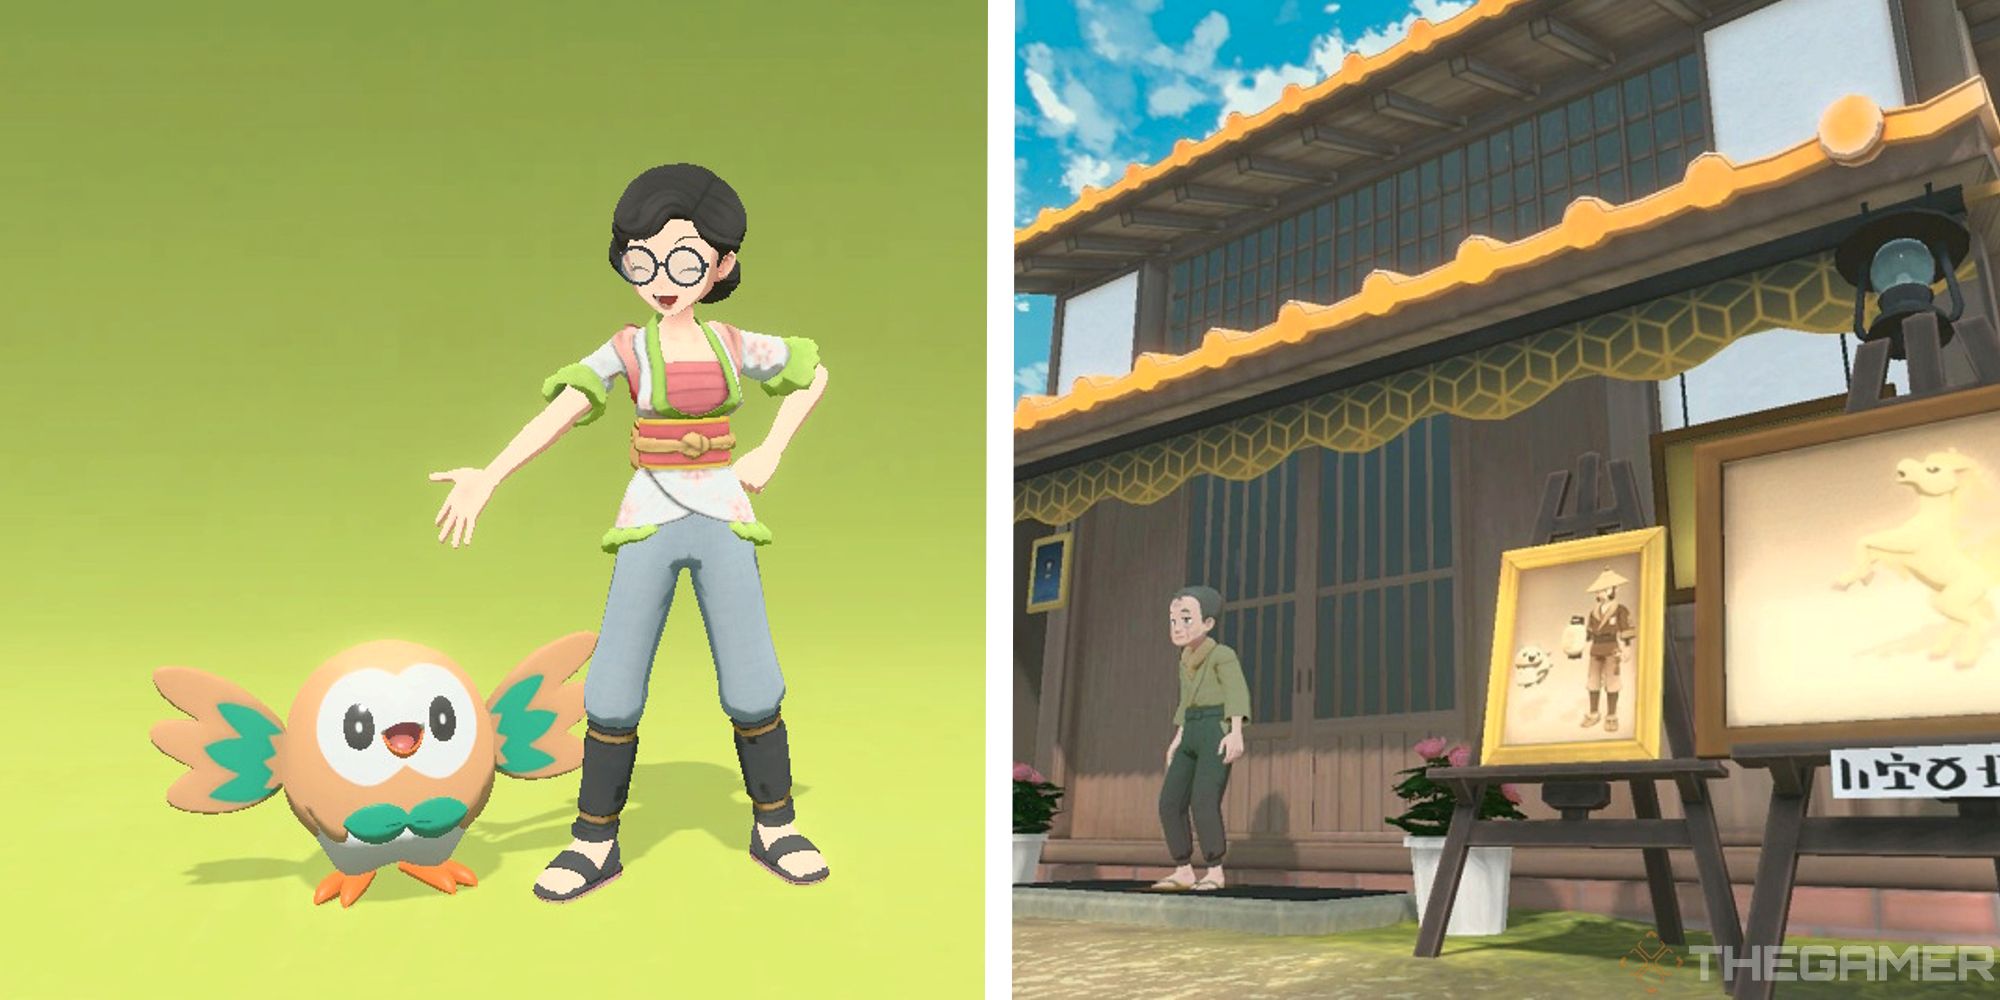 image of player posing with rowlet, next to image of photography studio exterior